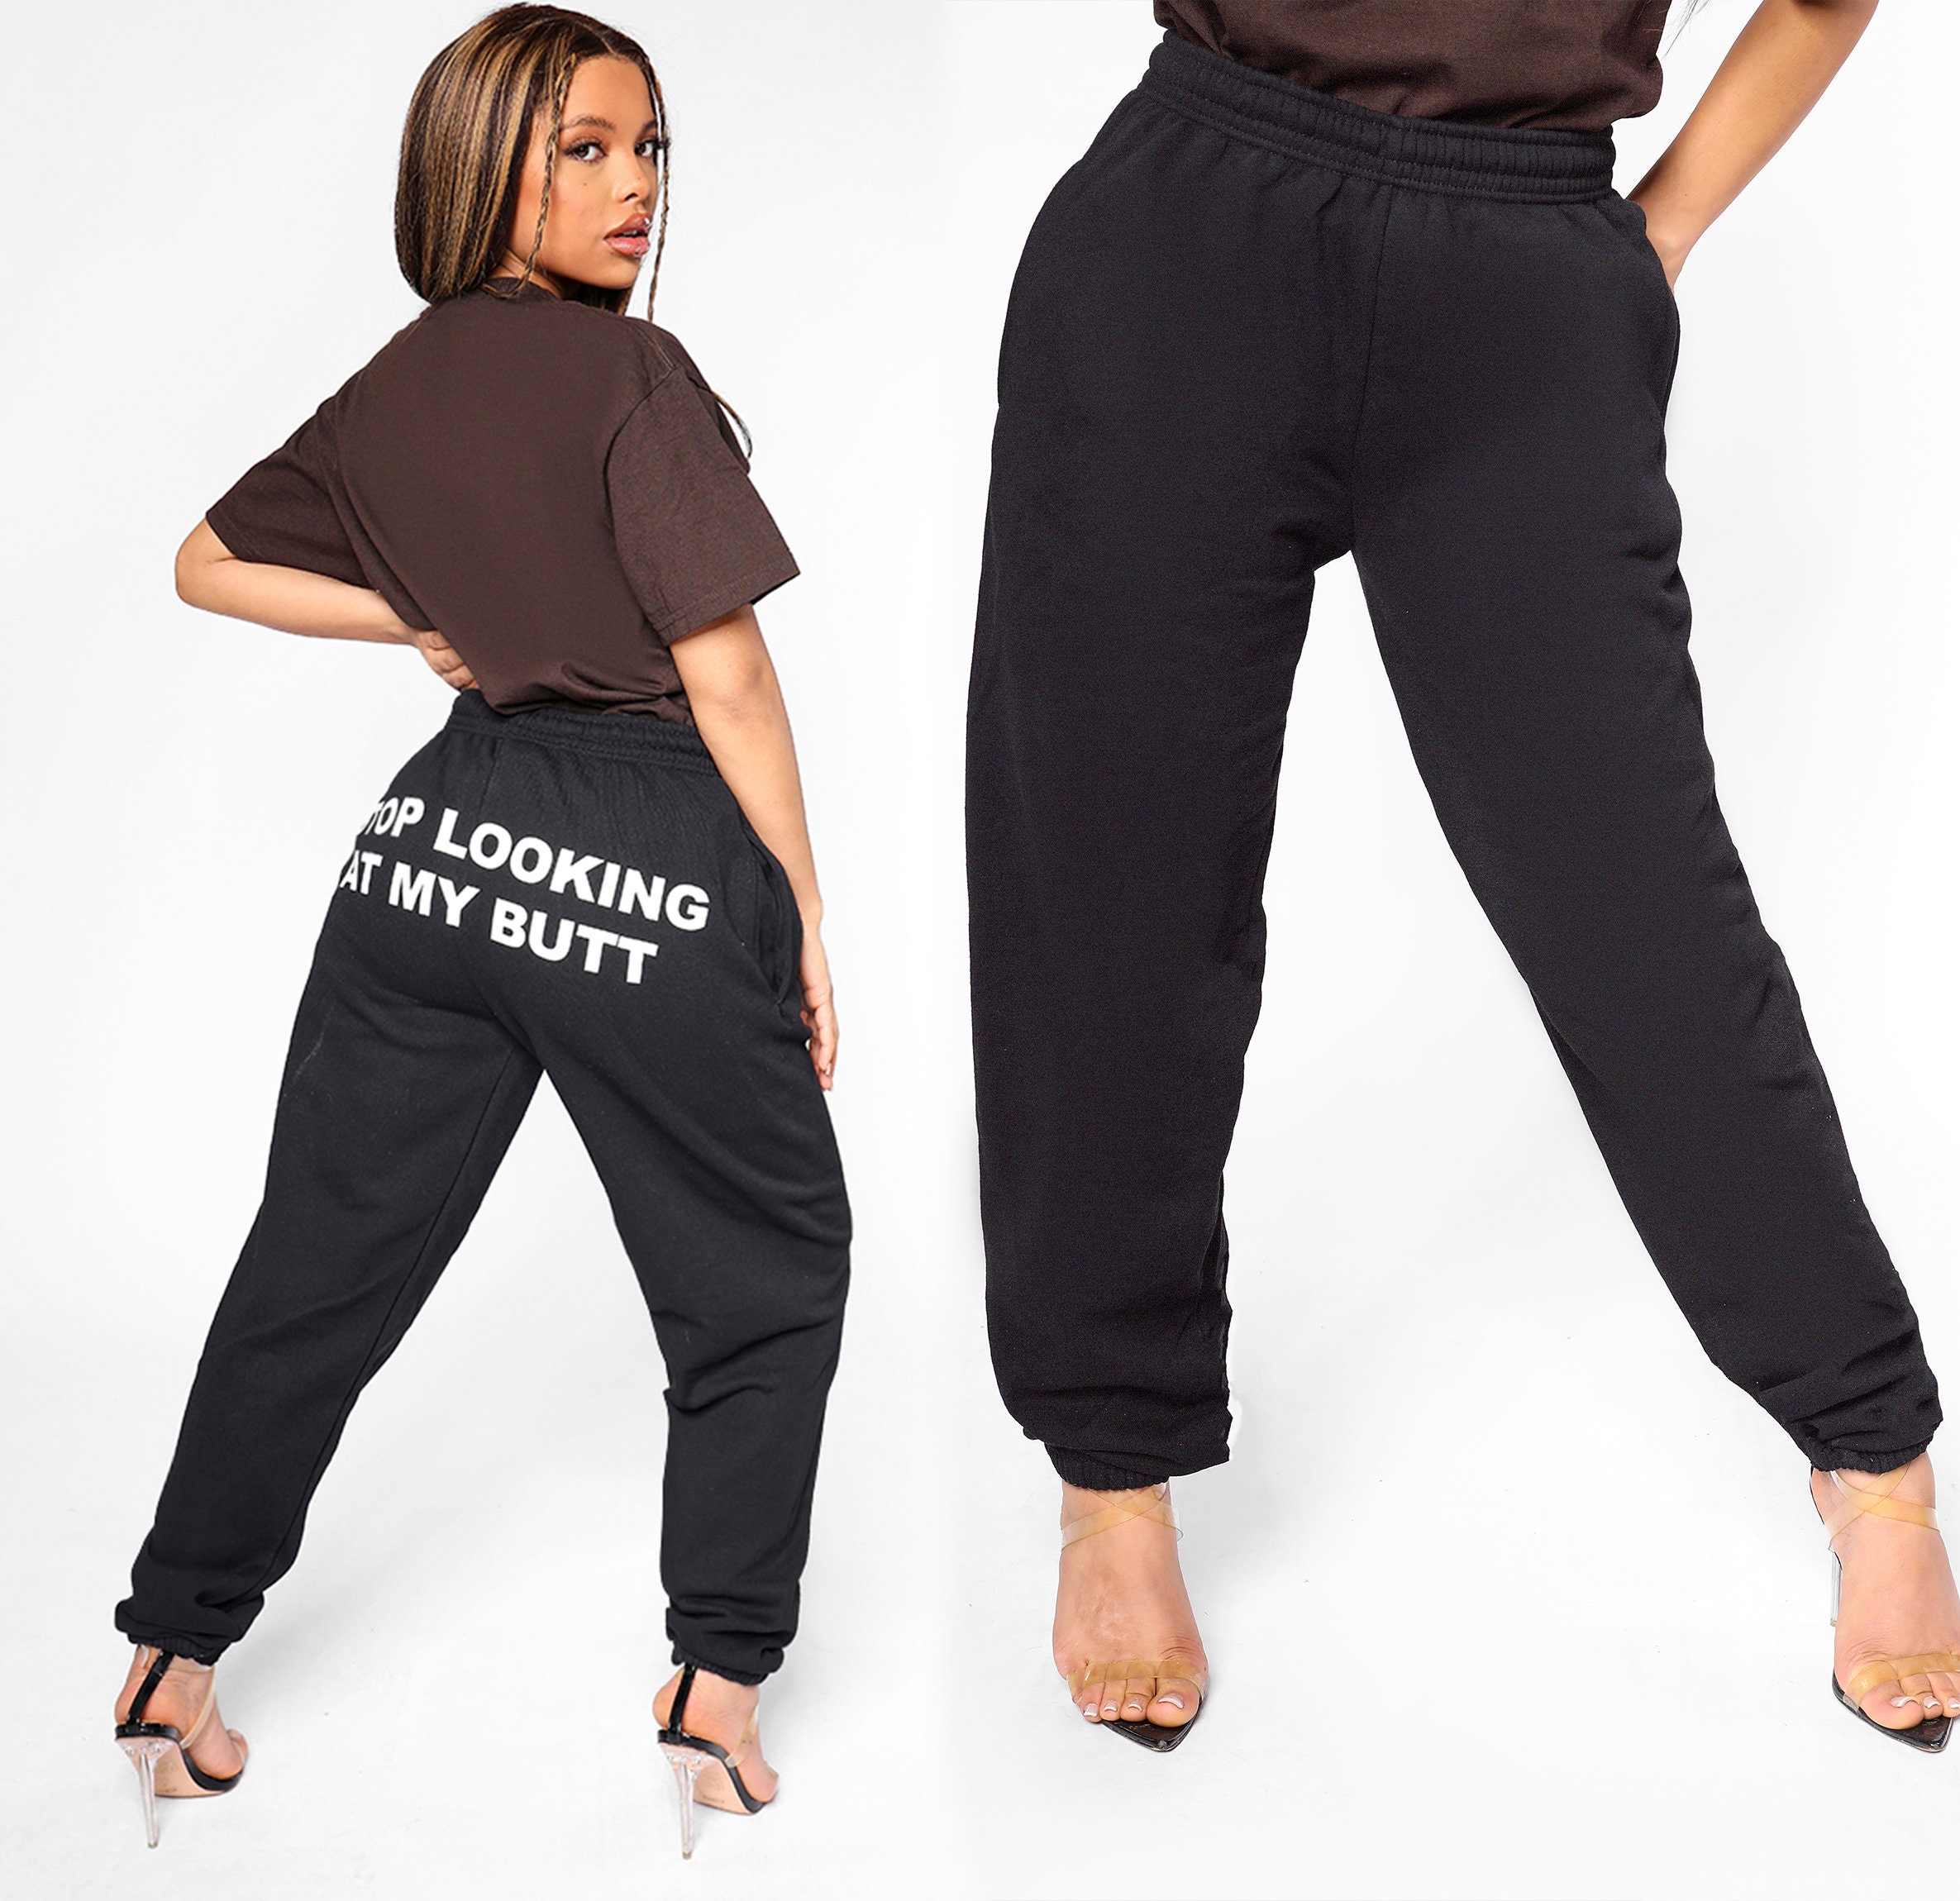 Winky Butt Made-to-order Sweatpants or Joggers -  Canada